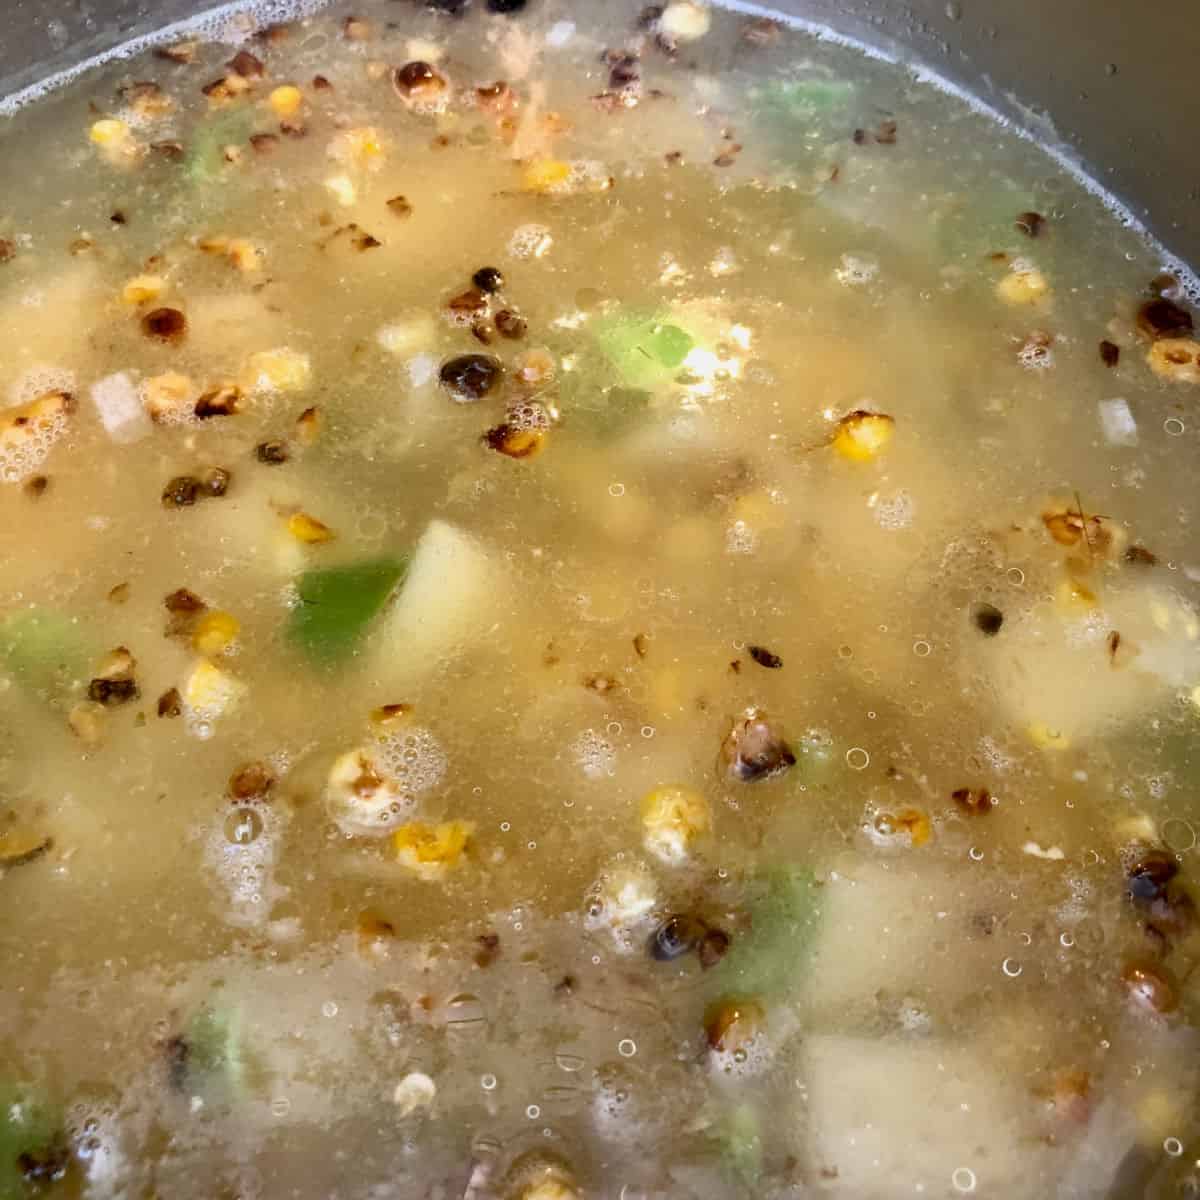 The corn soup with all the ingredients simmering in a pot.